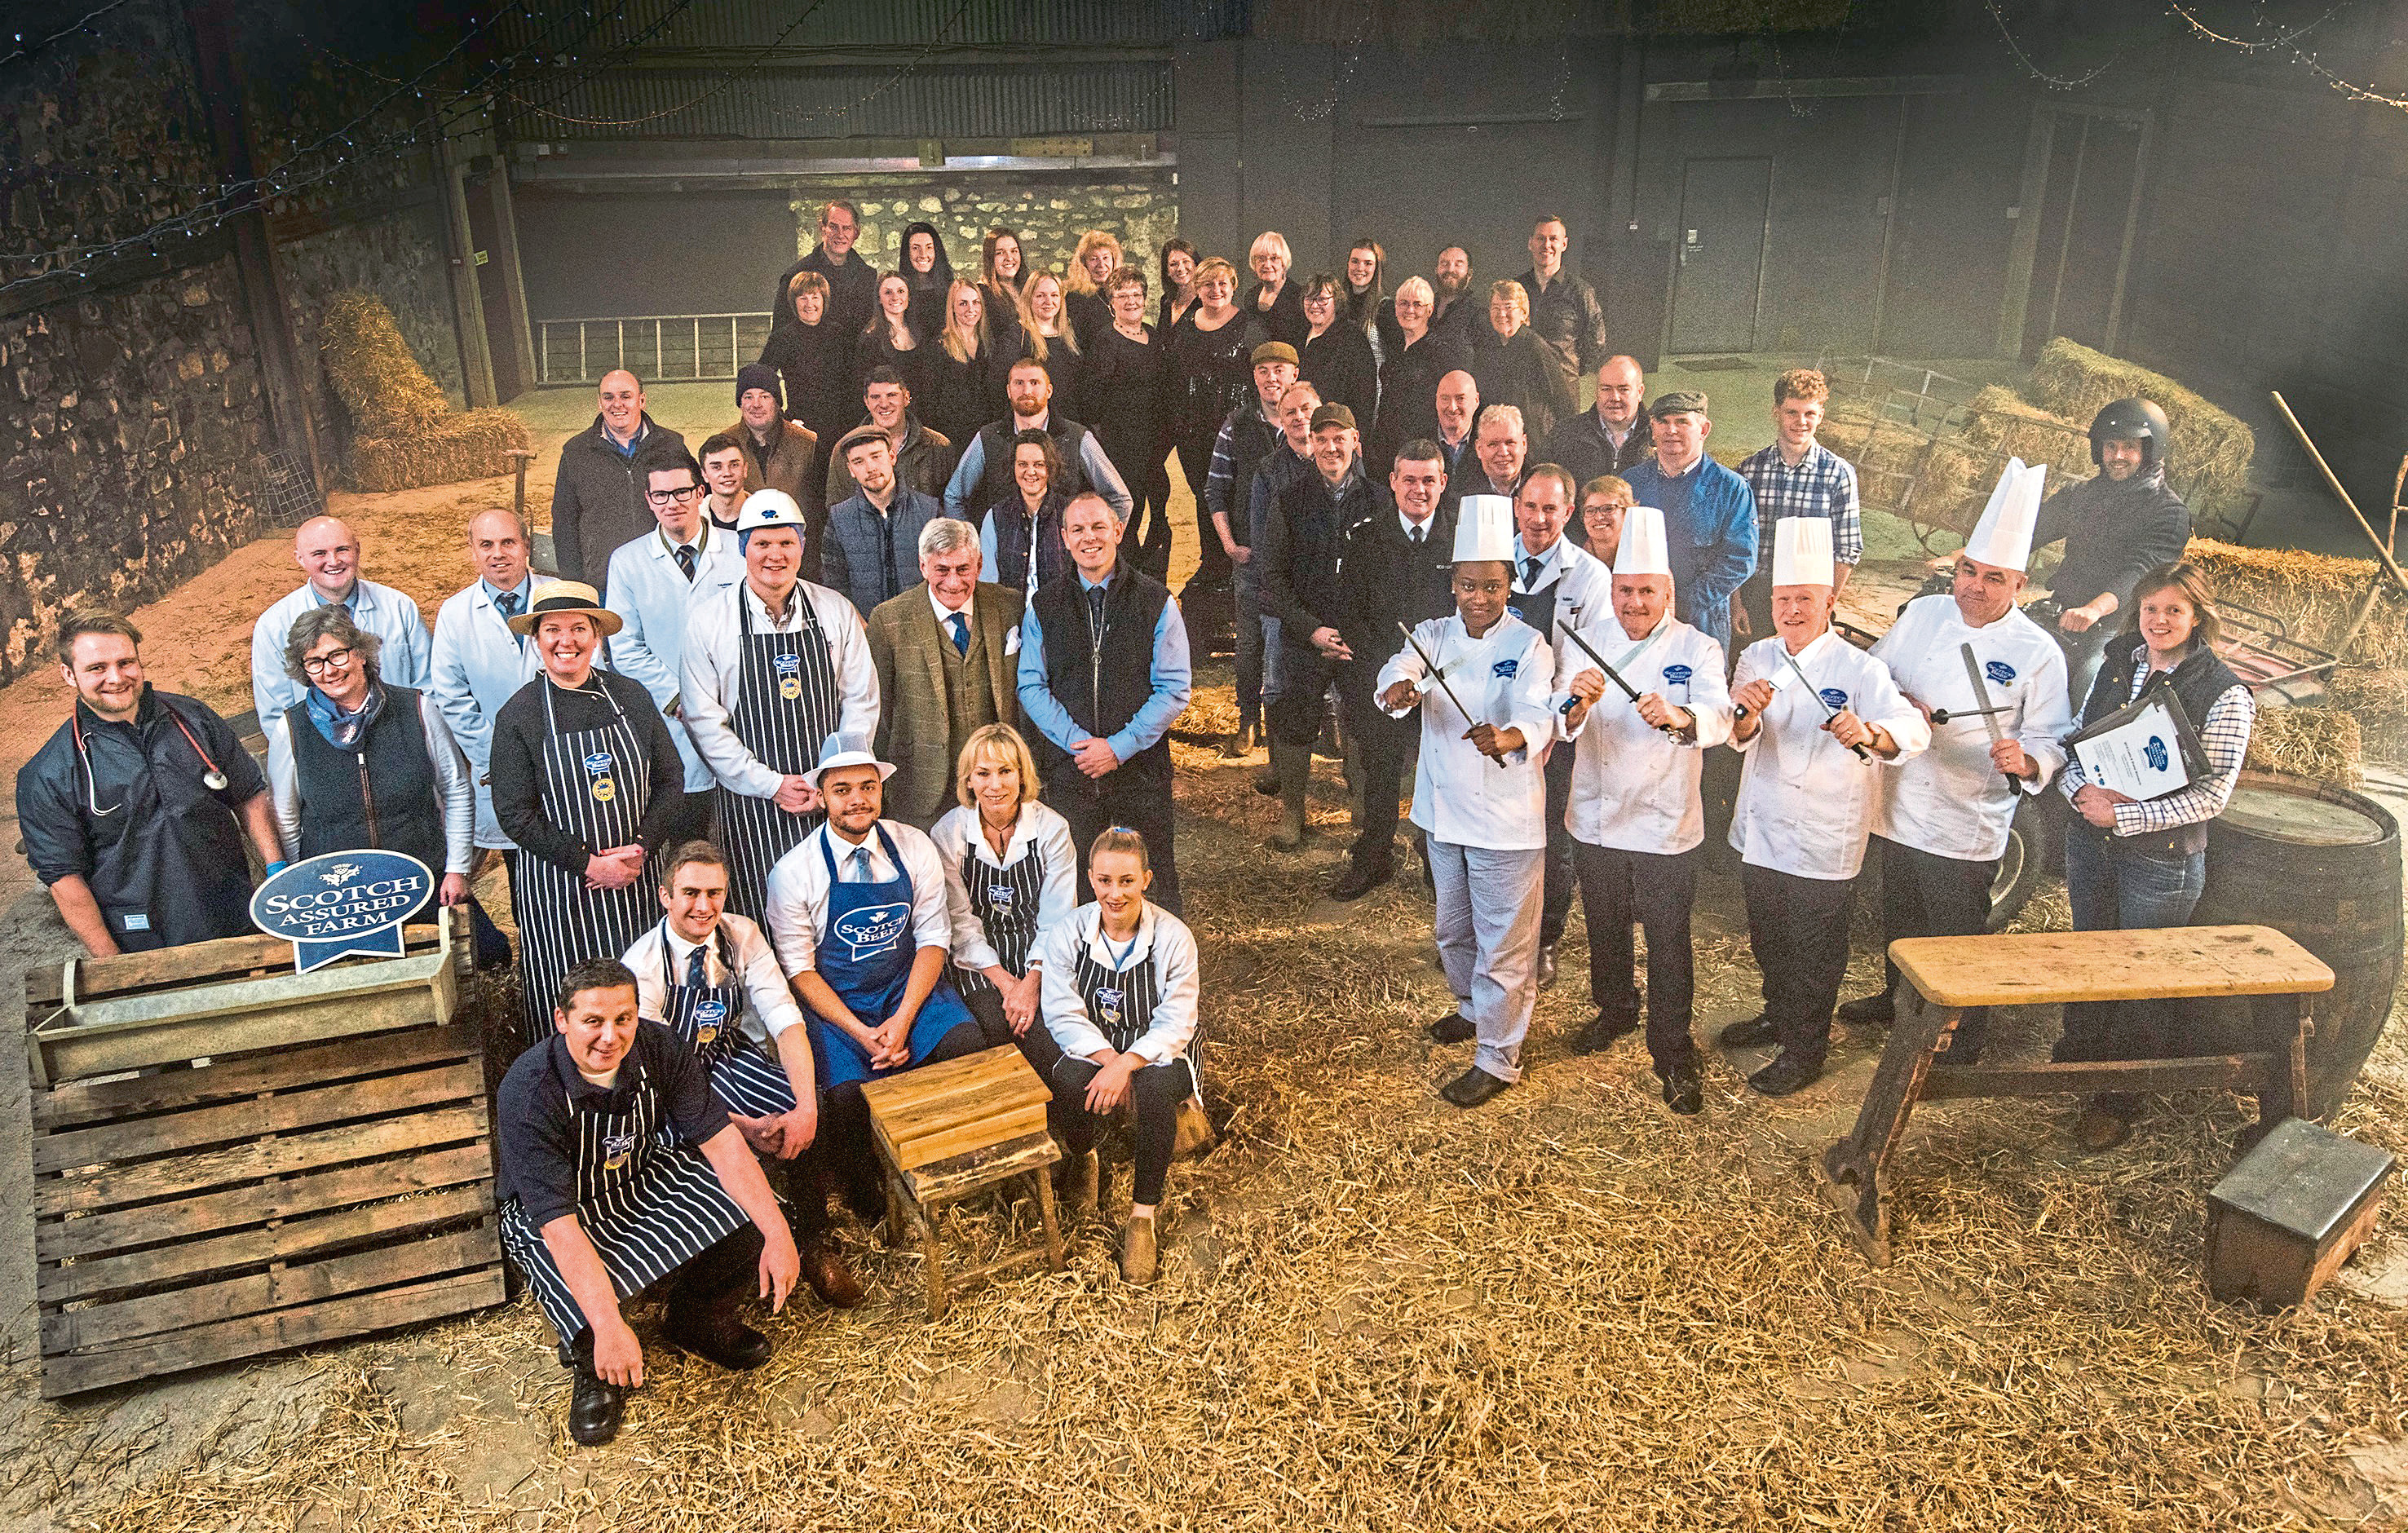 Farmers, butchers, chefs and auctioneers were among a wide range of people who helped launch the Know Your Beef campaign